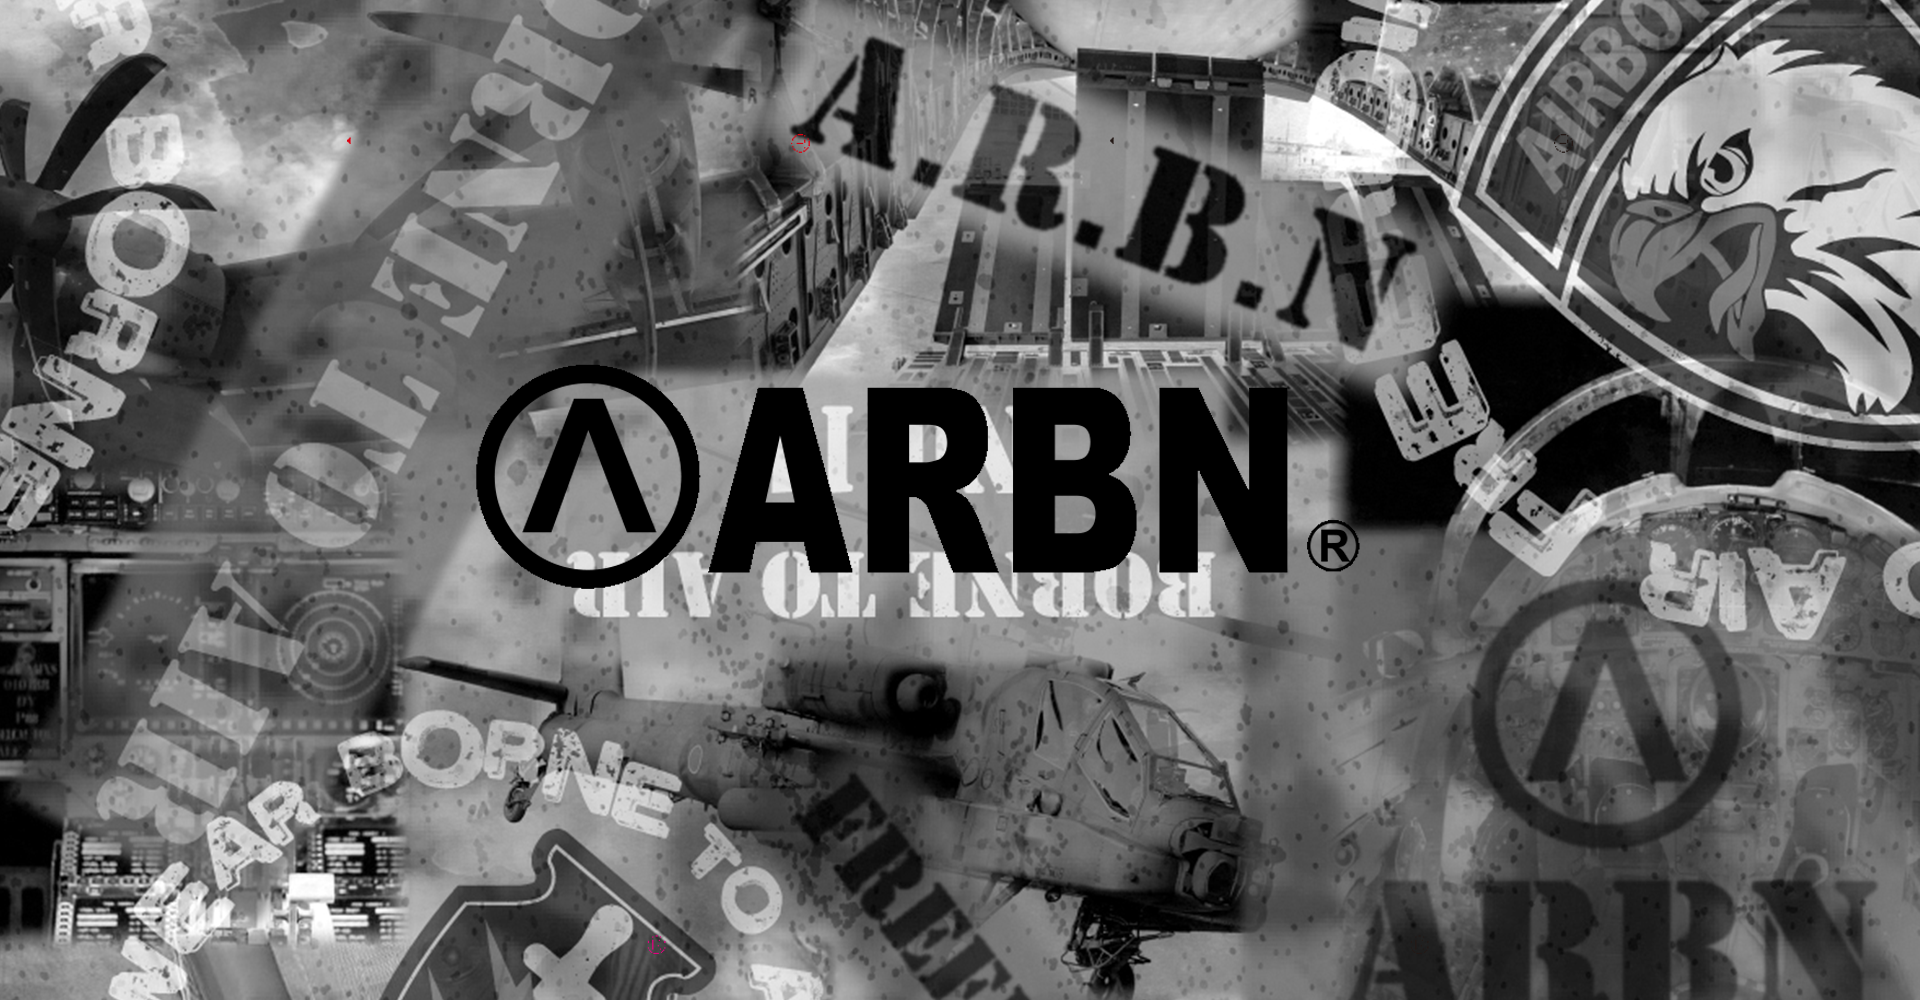 ARBN official site